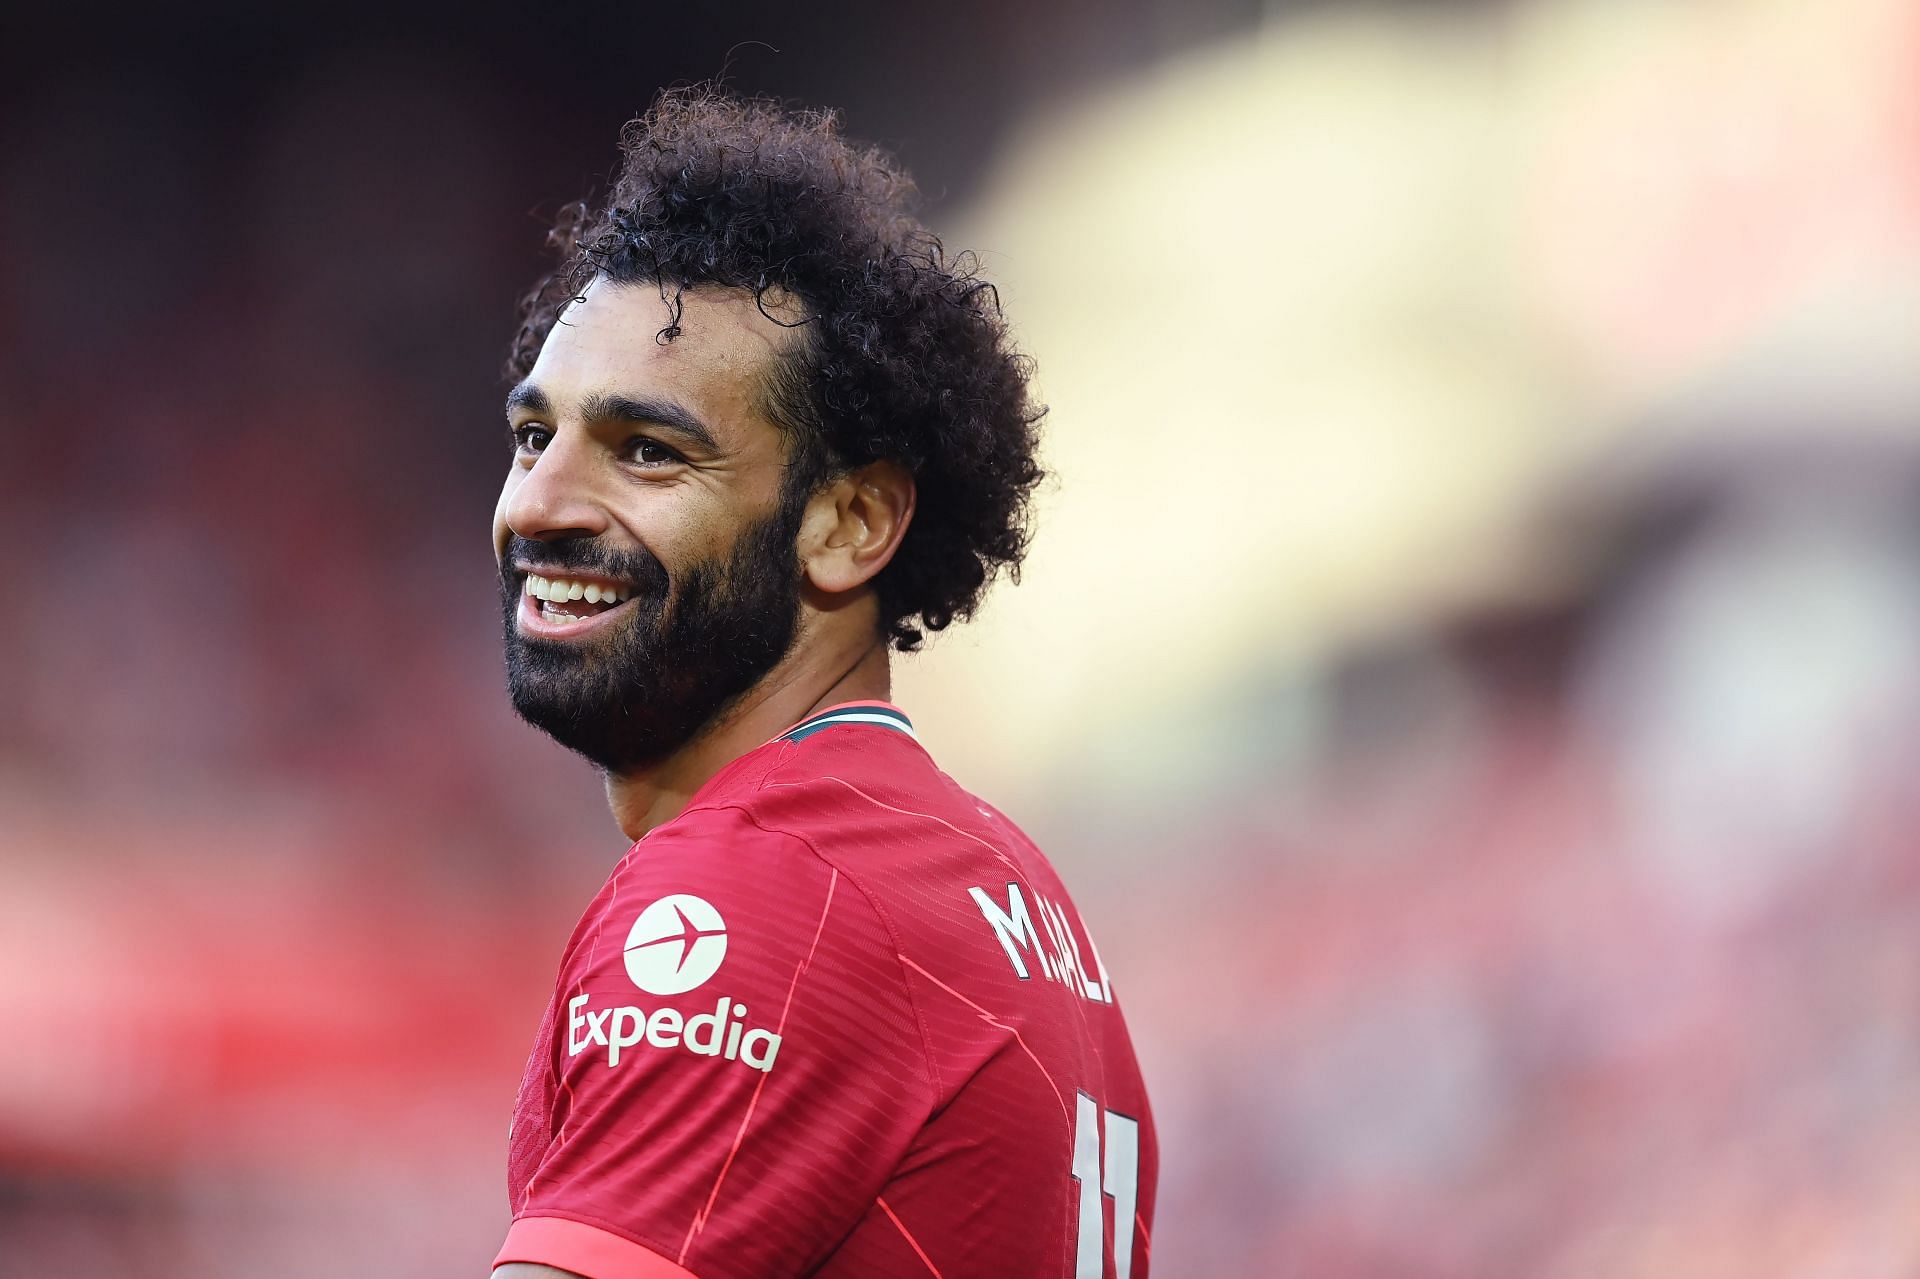 Mohamed Salah is among the best foreigners to play for the Reds.